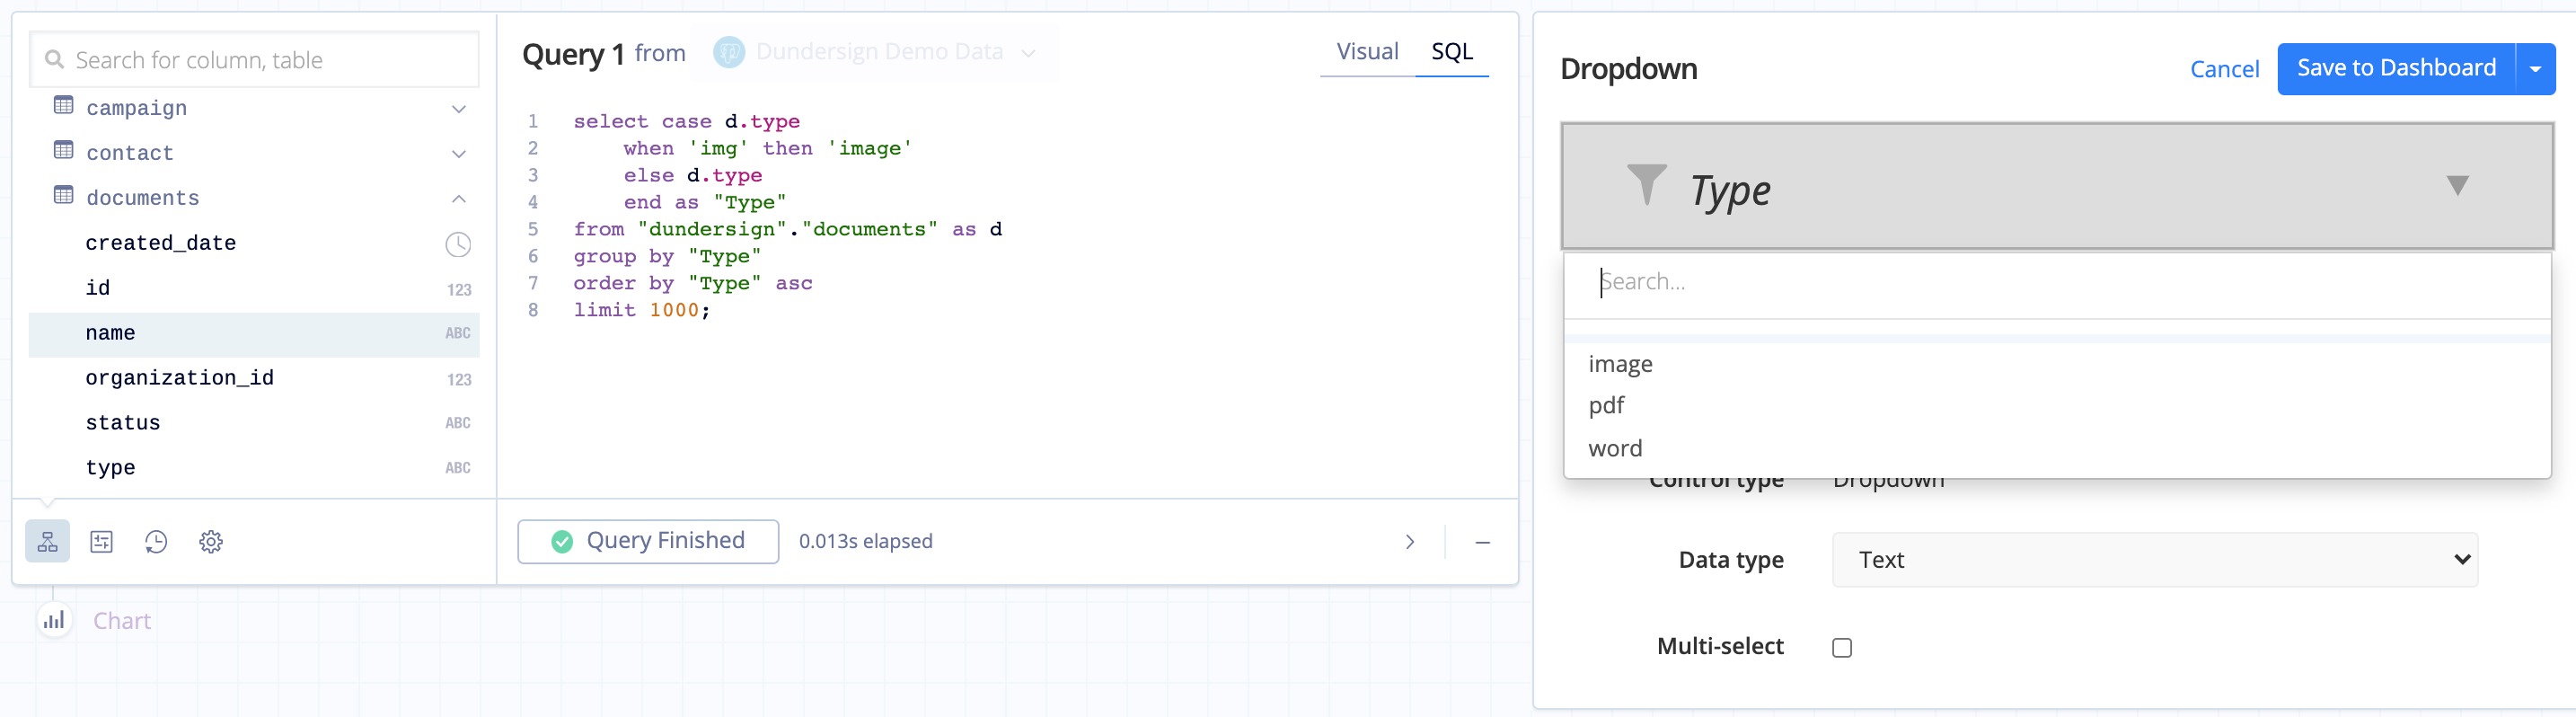 CASE statement in Dropdown query - Visual SQL